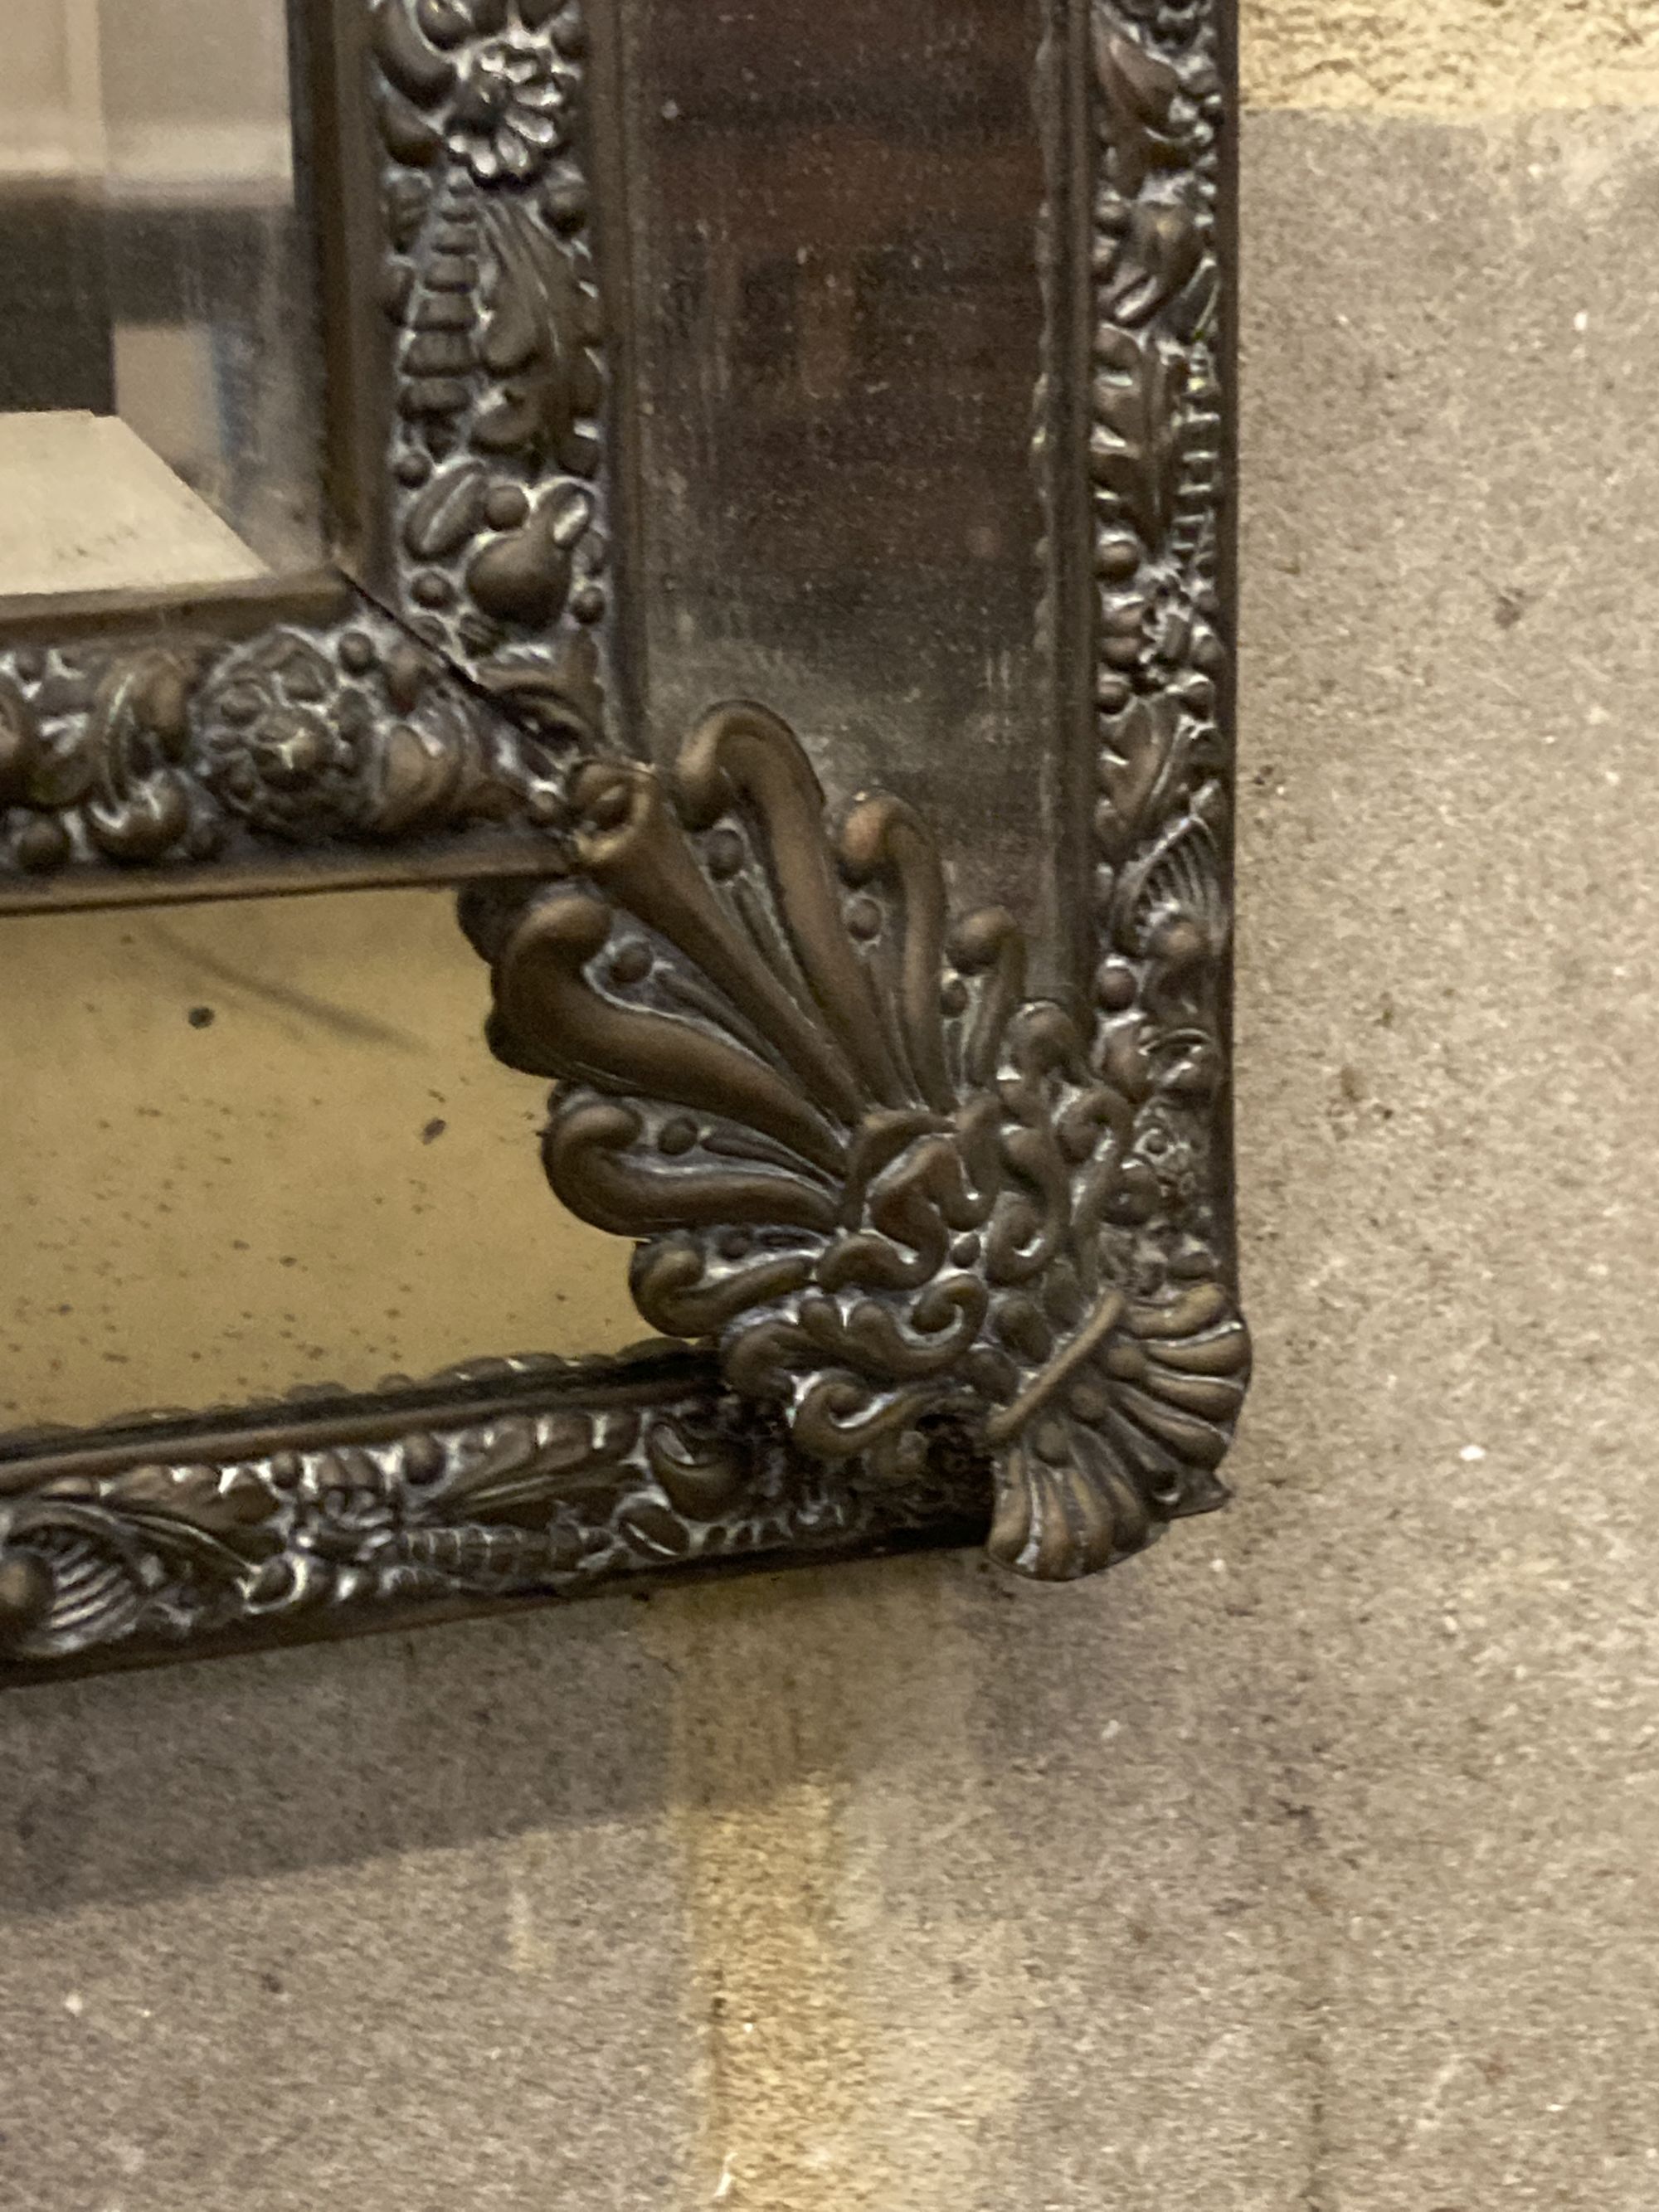 A 19th century French embossed brass wall mirror, width 33cm, height 54cm